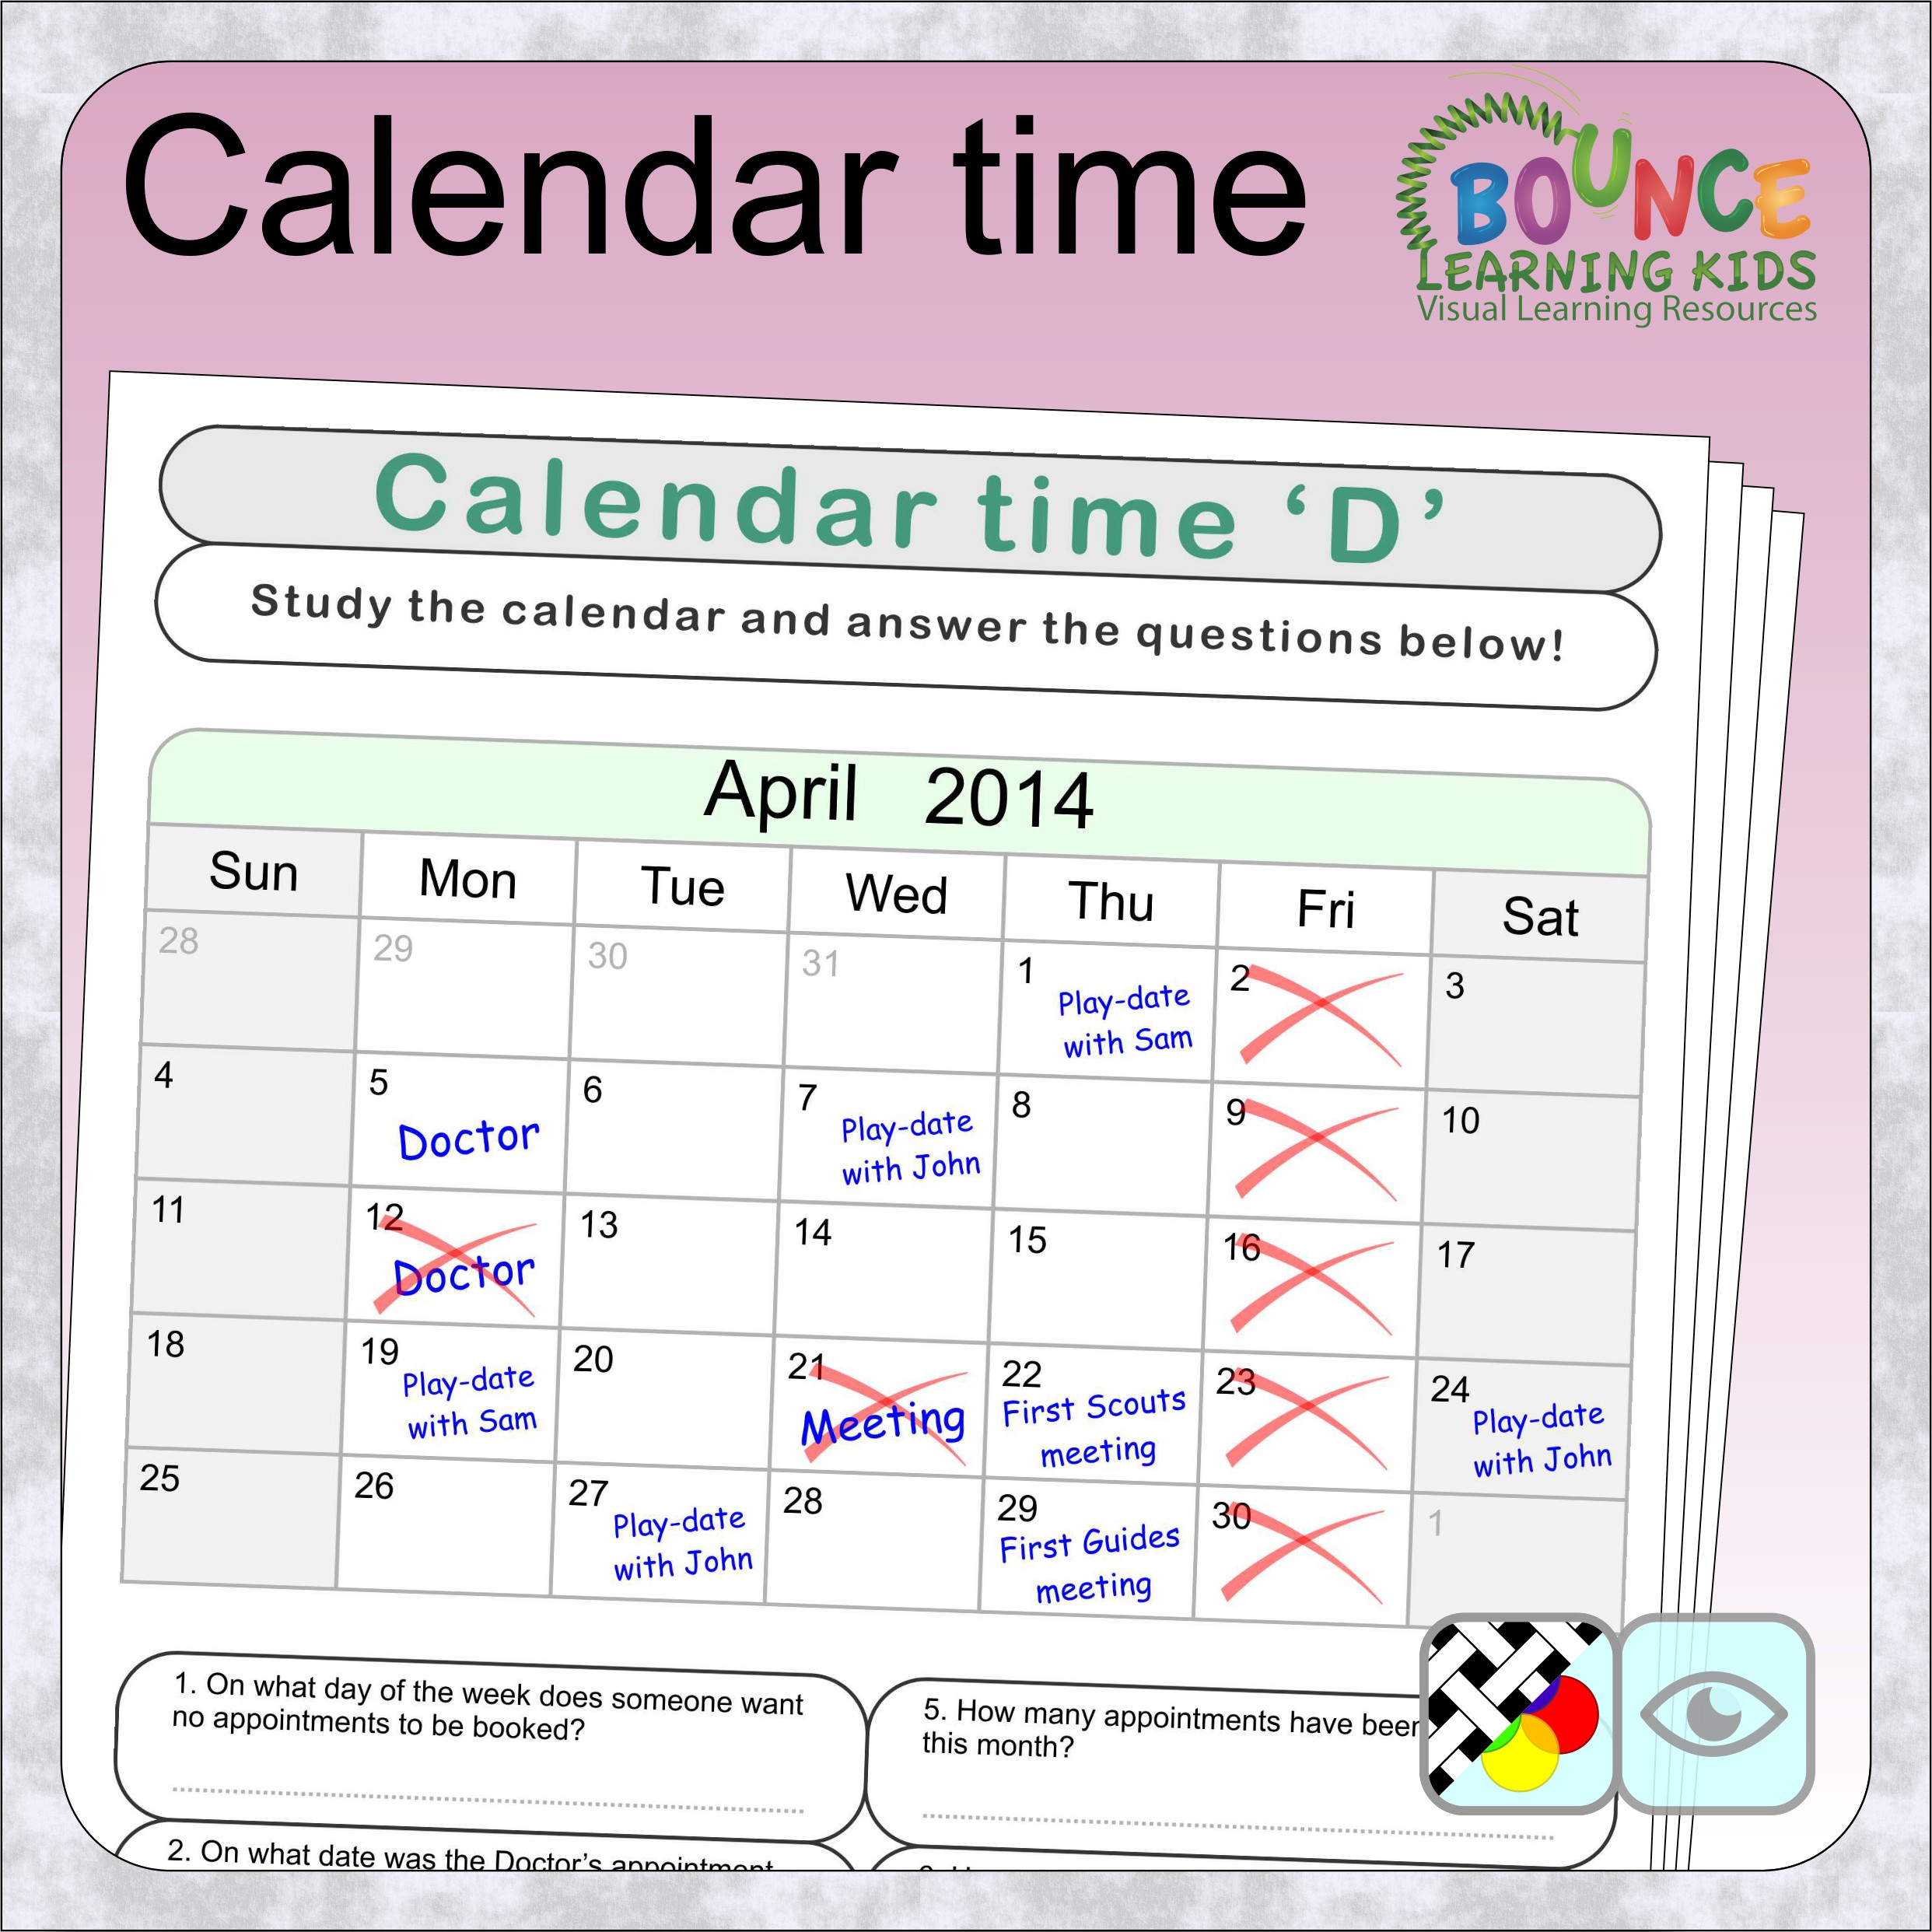 Fun Calendar time worksheets for download with 48 questions